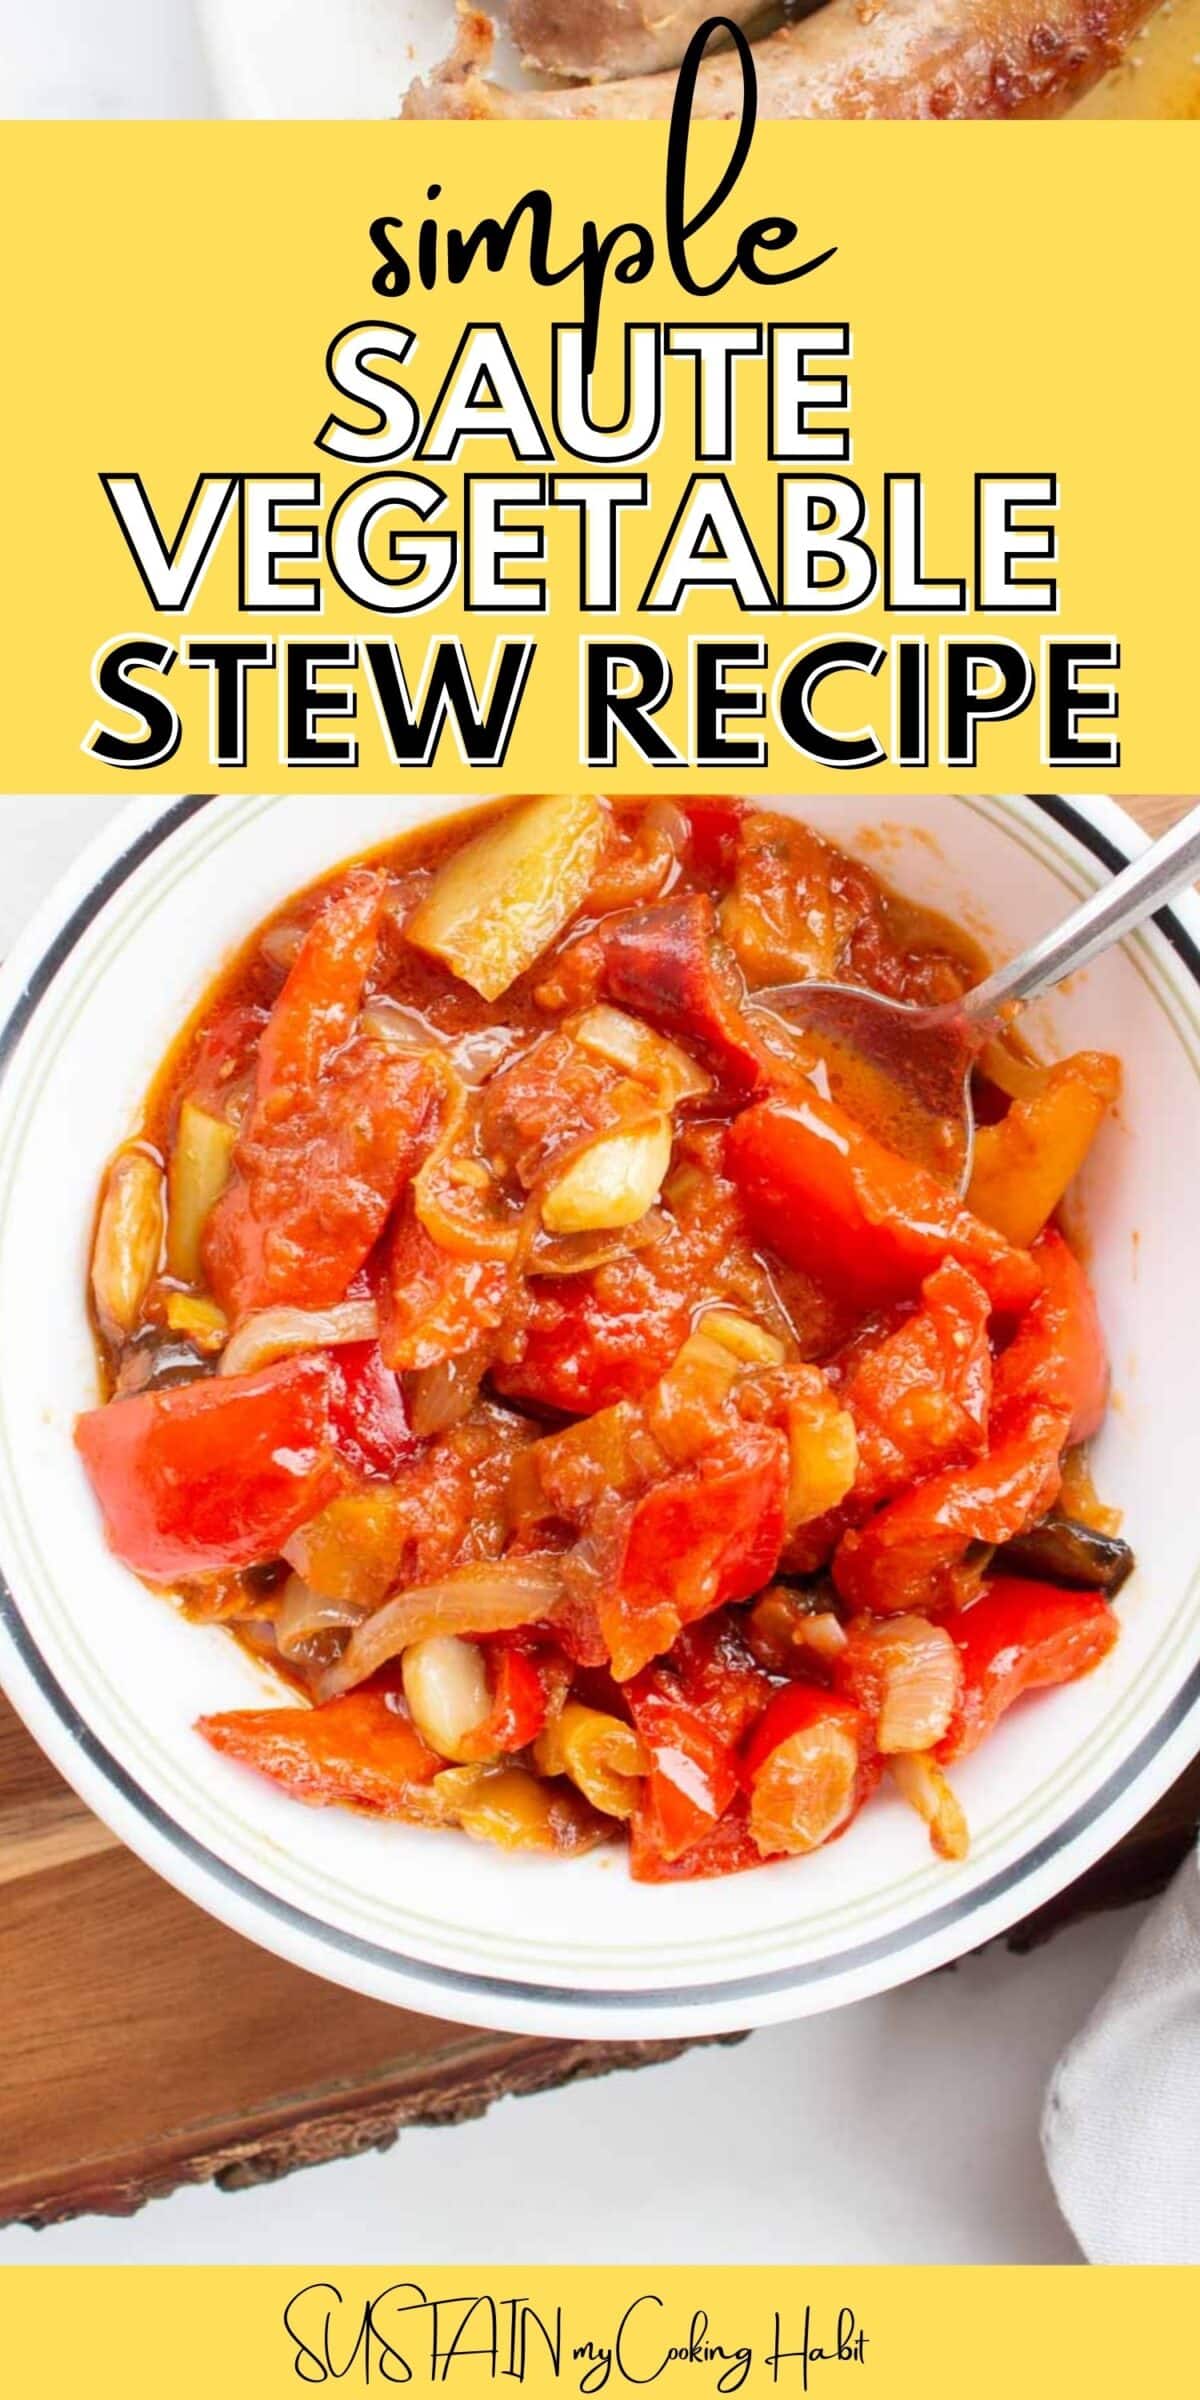 bowl of vegetable stew with text overlay